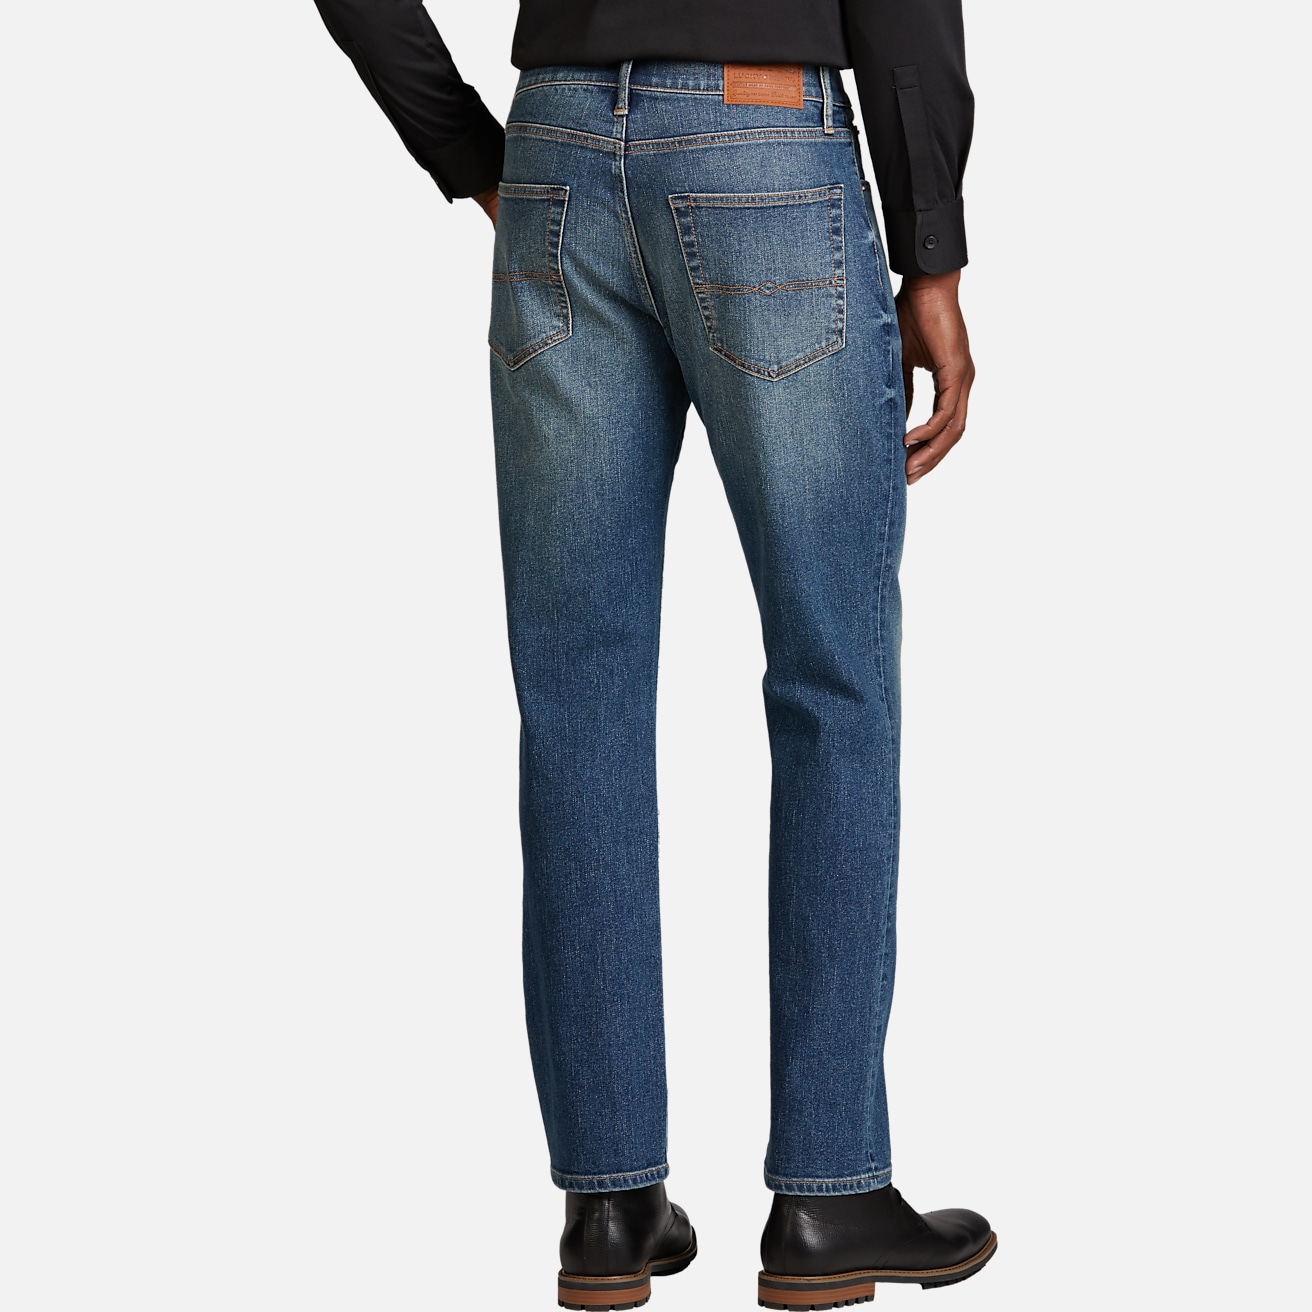 https://image.menswearhouse.com/is/image/TMW/TMW_22ZG_53_LUCKY_BRAND_JEANS_DARK_WASH_ALT1?imPolicy=pdp-mob-2x